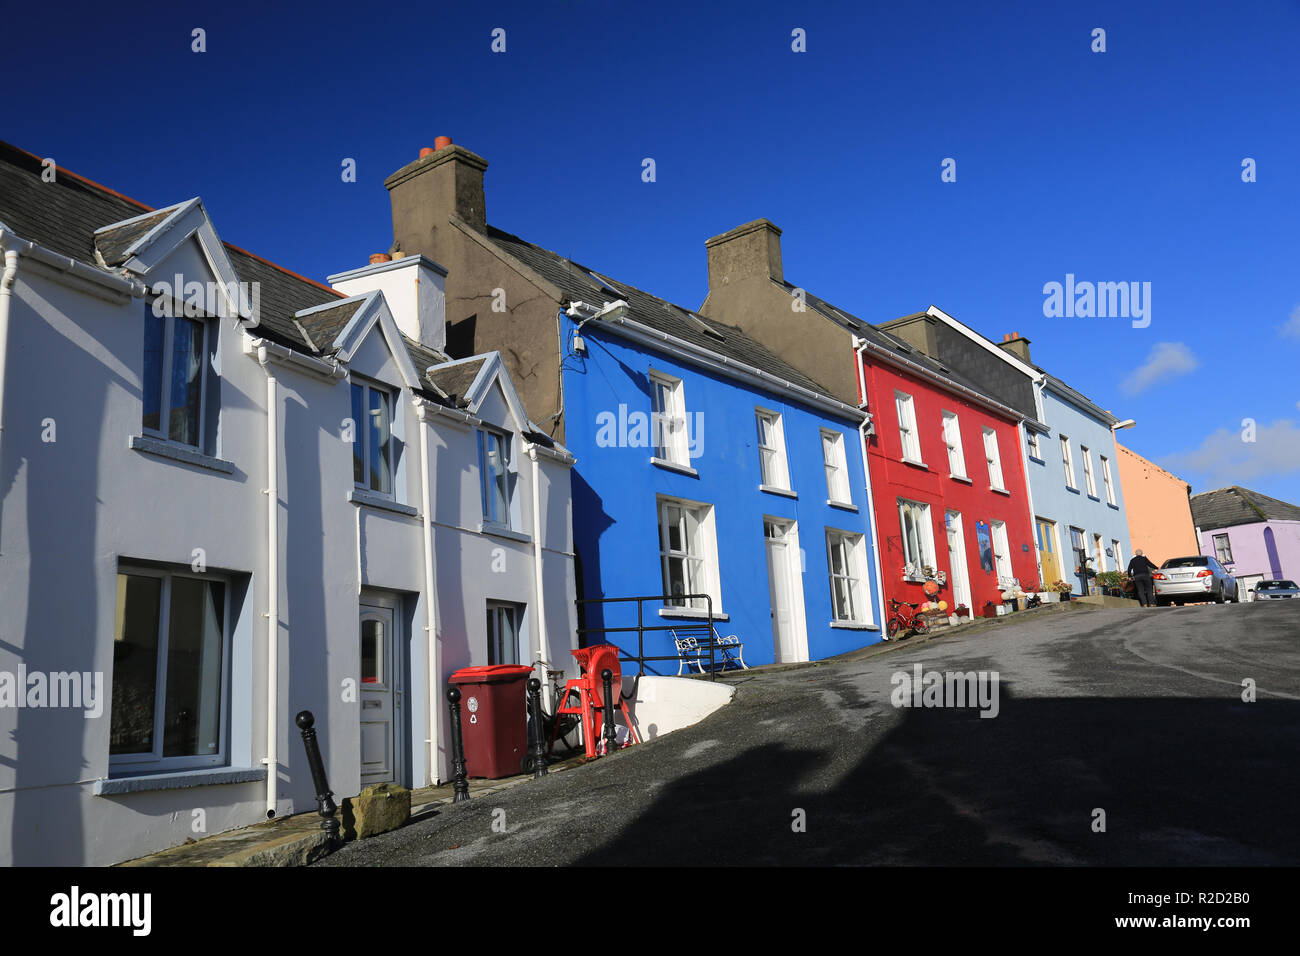 brightly painted houses in an irtish rural village, wild atlantic way, county cork, ireland Stock Photo